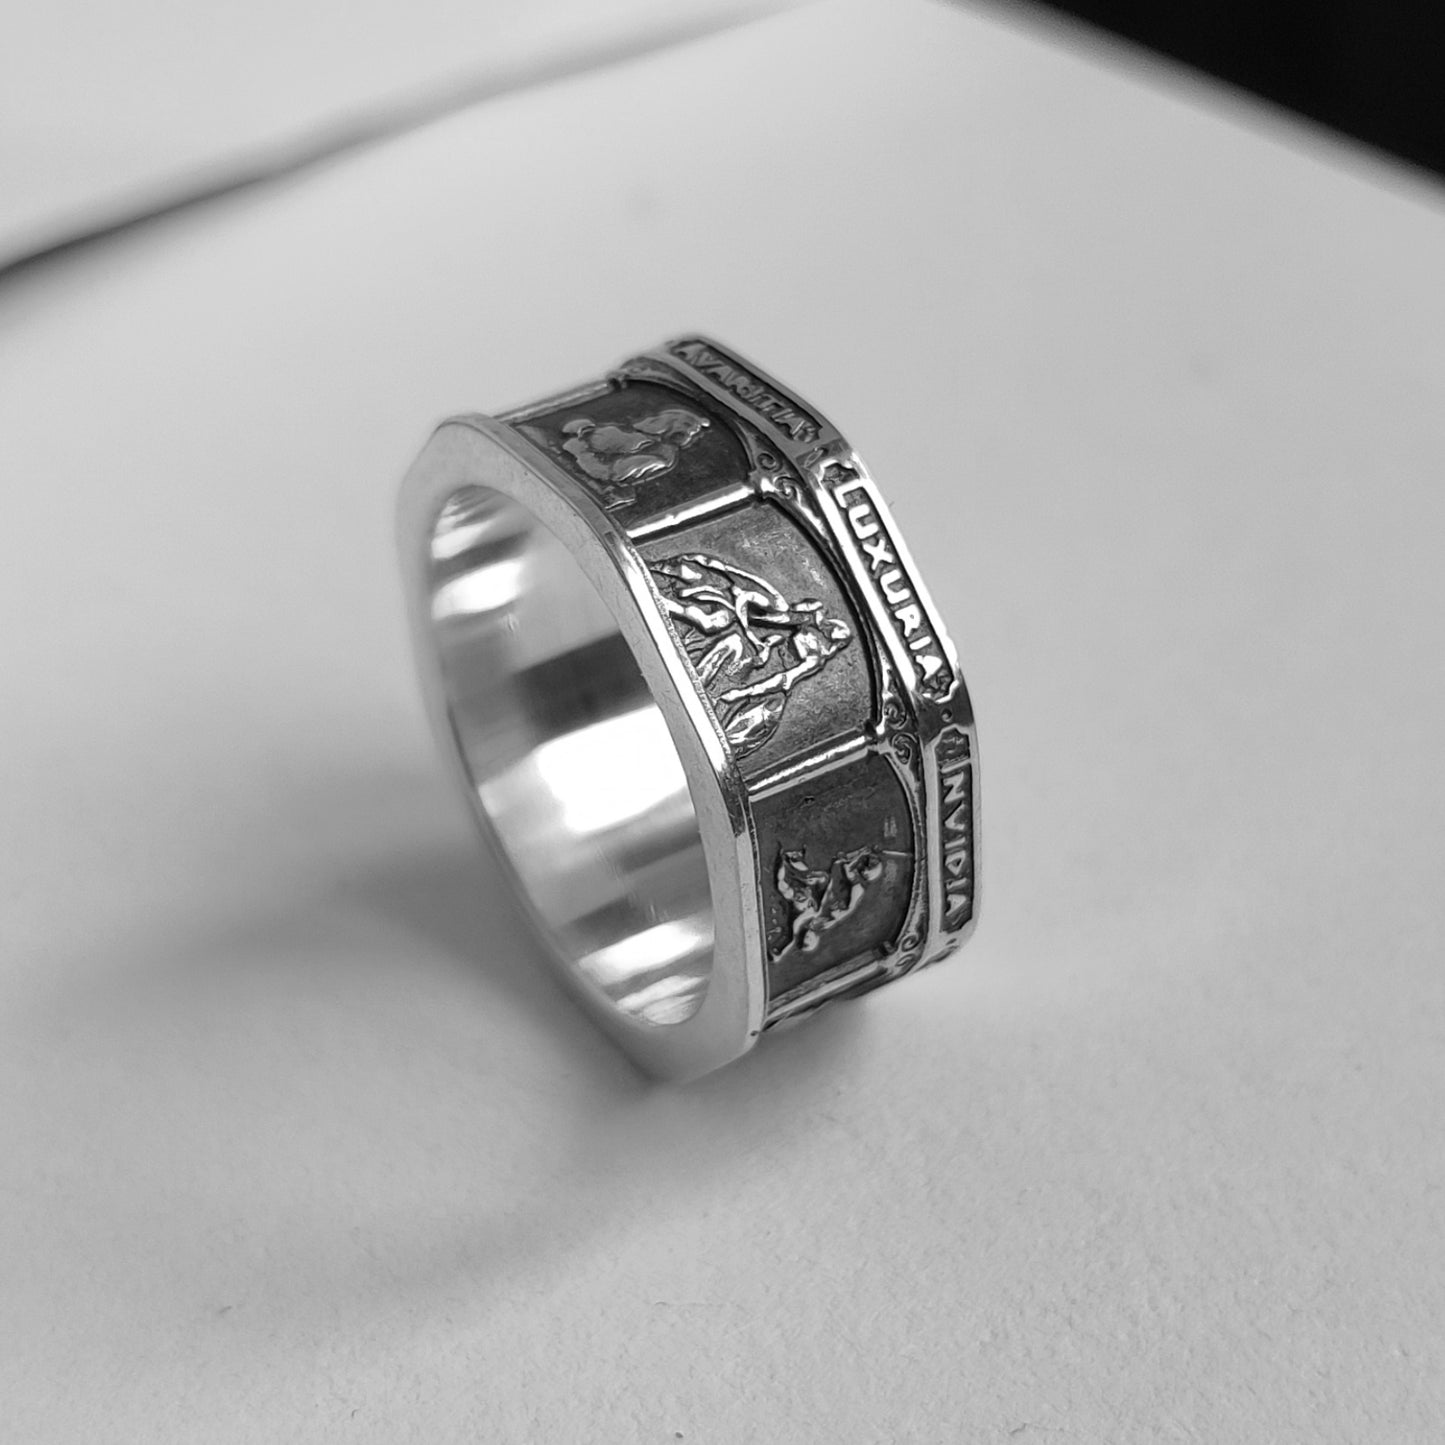 Seven Cardinal Sins, Seven Deadly Sins, Theological Ring, Christian Ring, Sterling Silver Stoic Ring